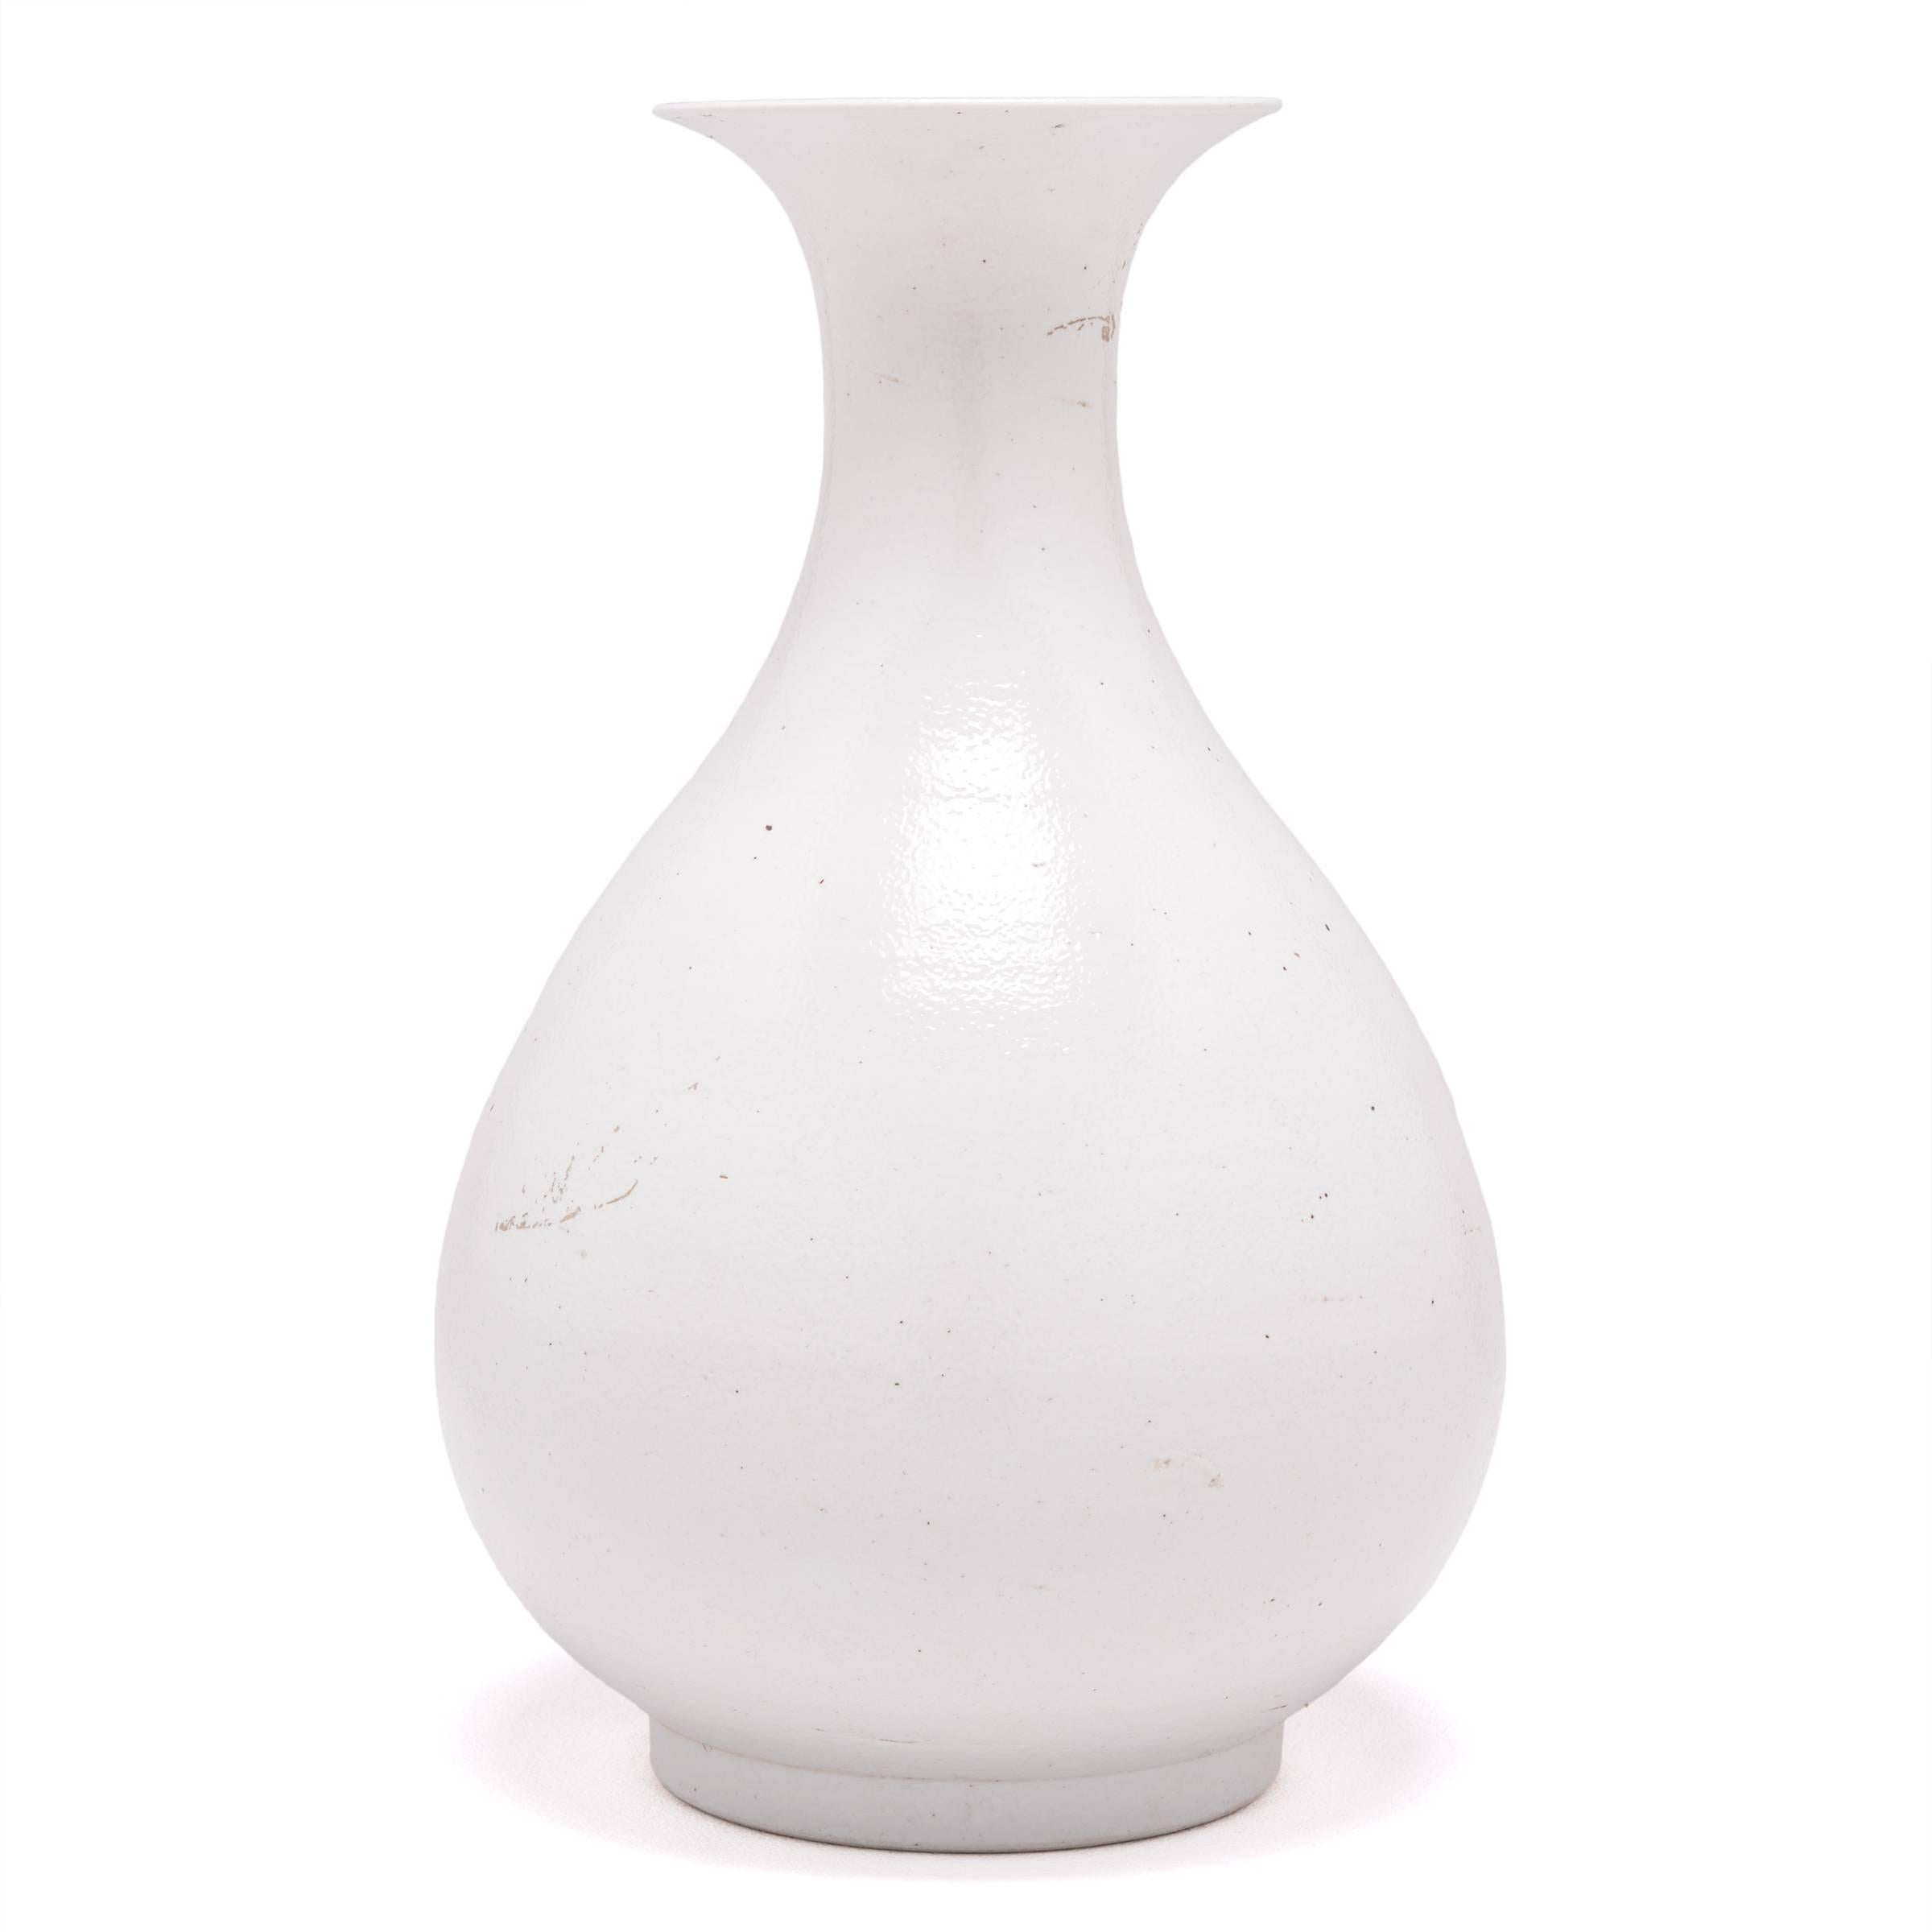 Drawing on a long Chinese tradition of monochrome ceramics, this porcelain vase is cloaked in a cool white glaze to highlight its elegant silhouette. The timeless vase form is known as a yuhuchunping or pear-shaped vase and is defined by a rounded